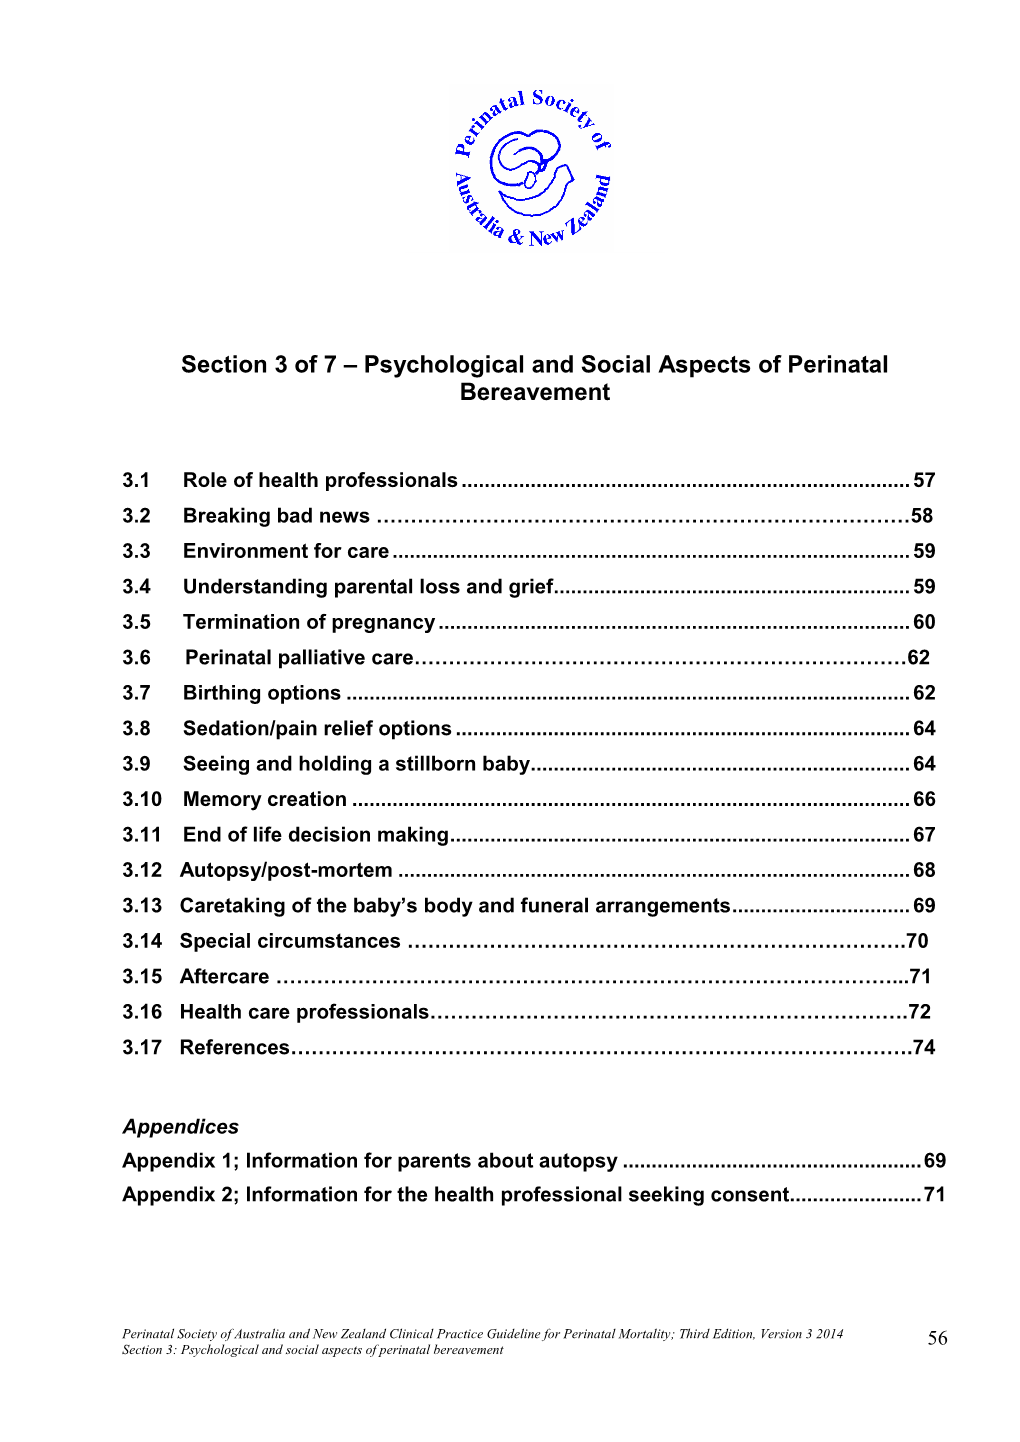 Section 3 of 7 – Psychological and Social Aspects of Perinatal Bereavement